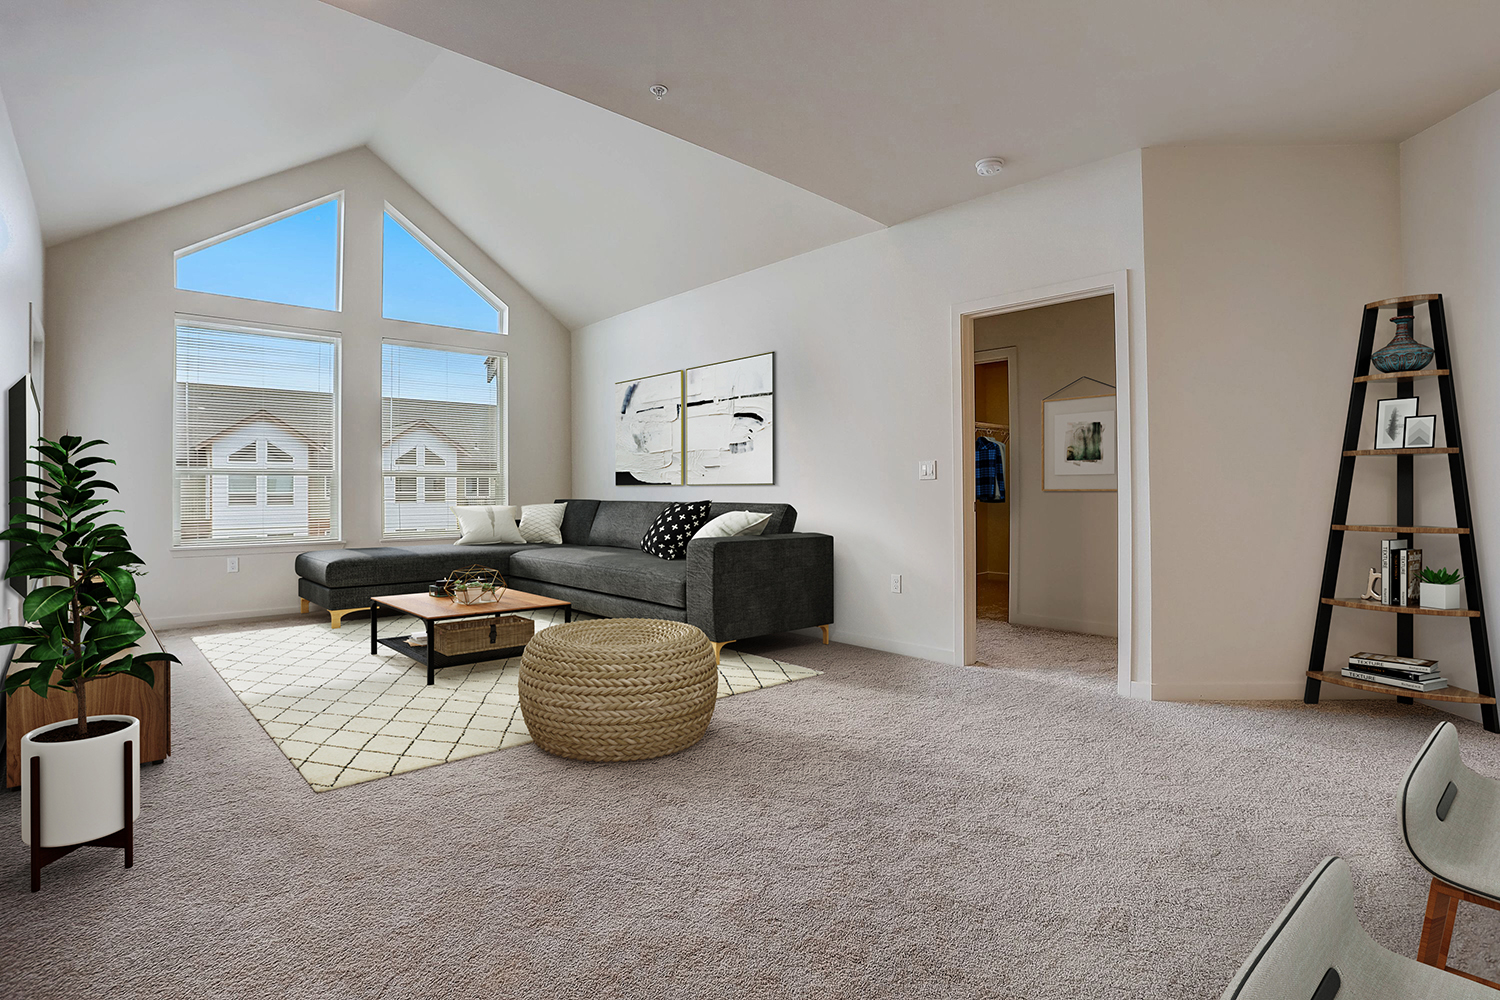 Large living room with floor-to-ceiling window at The Lodge Apartments.